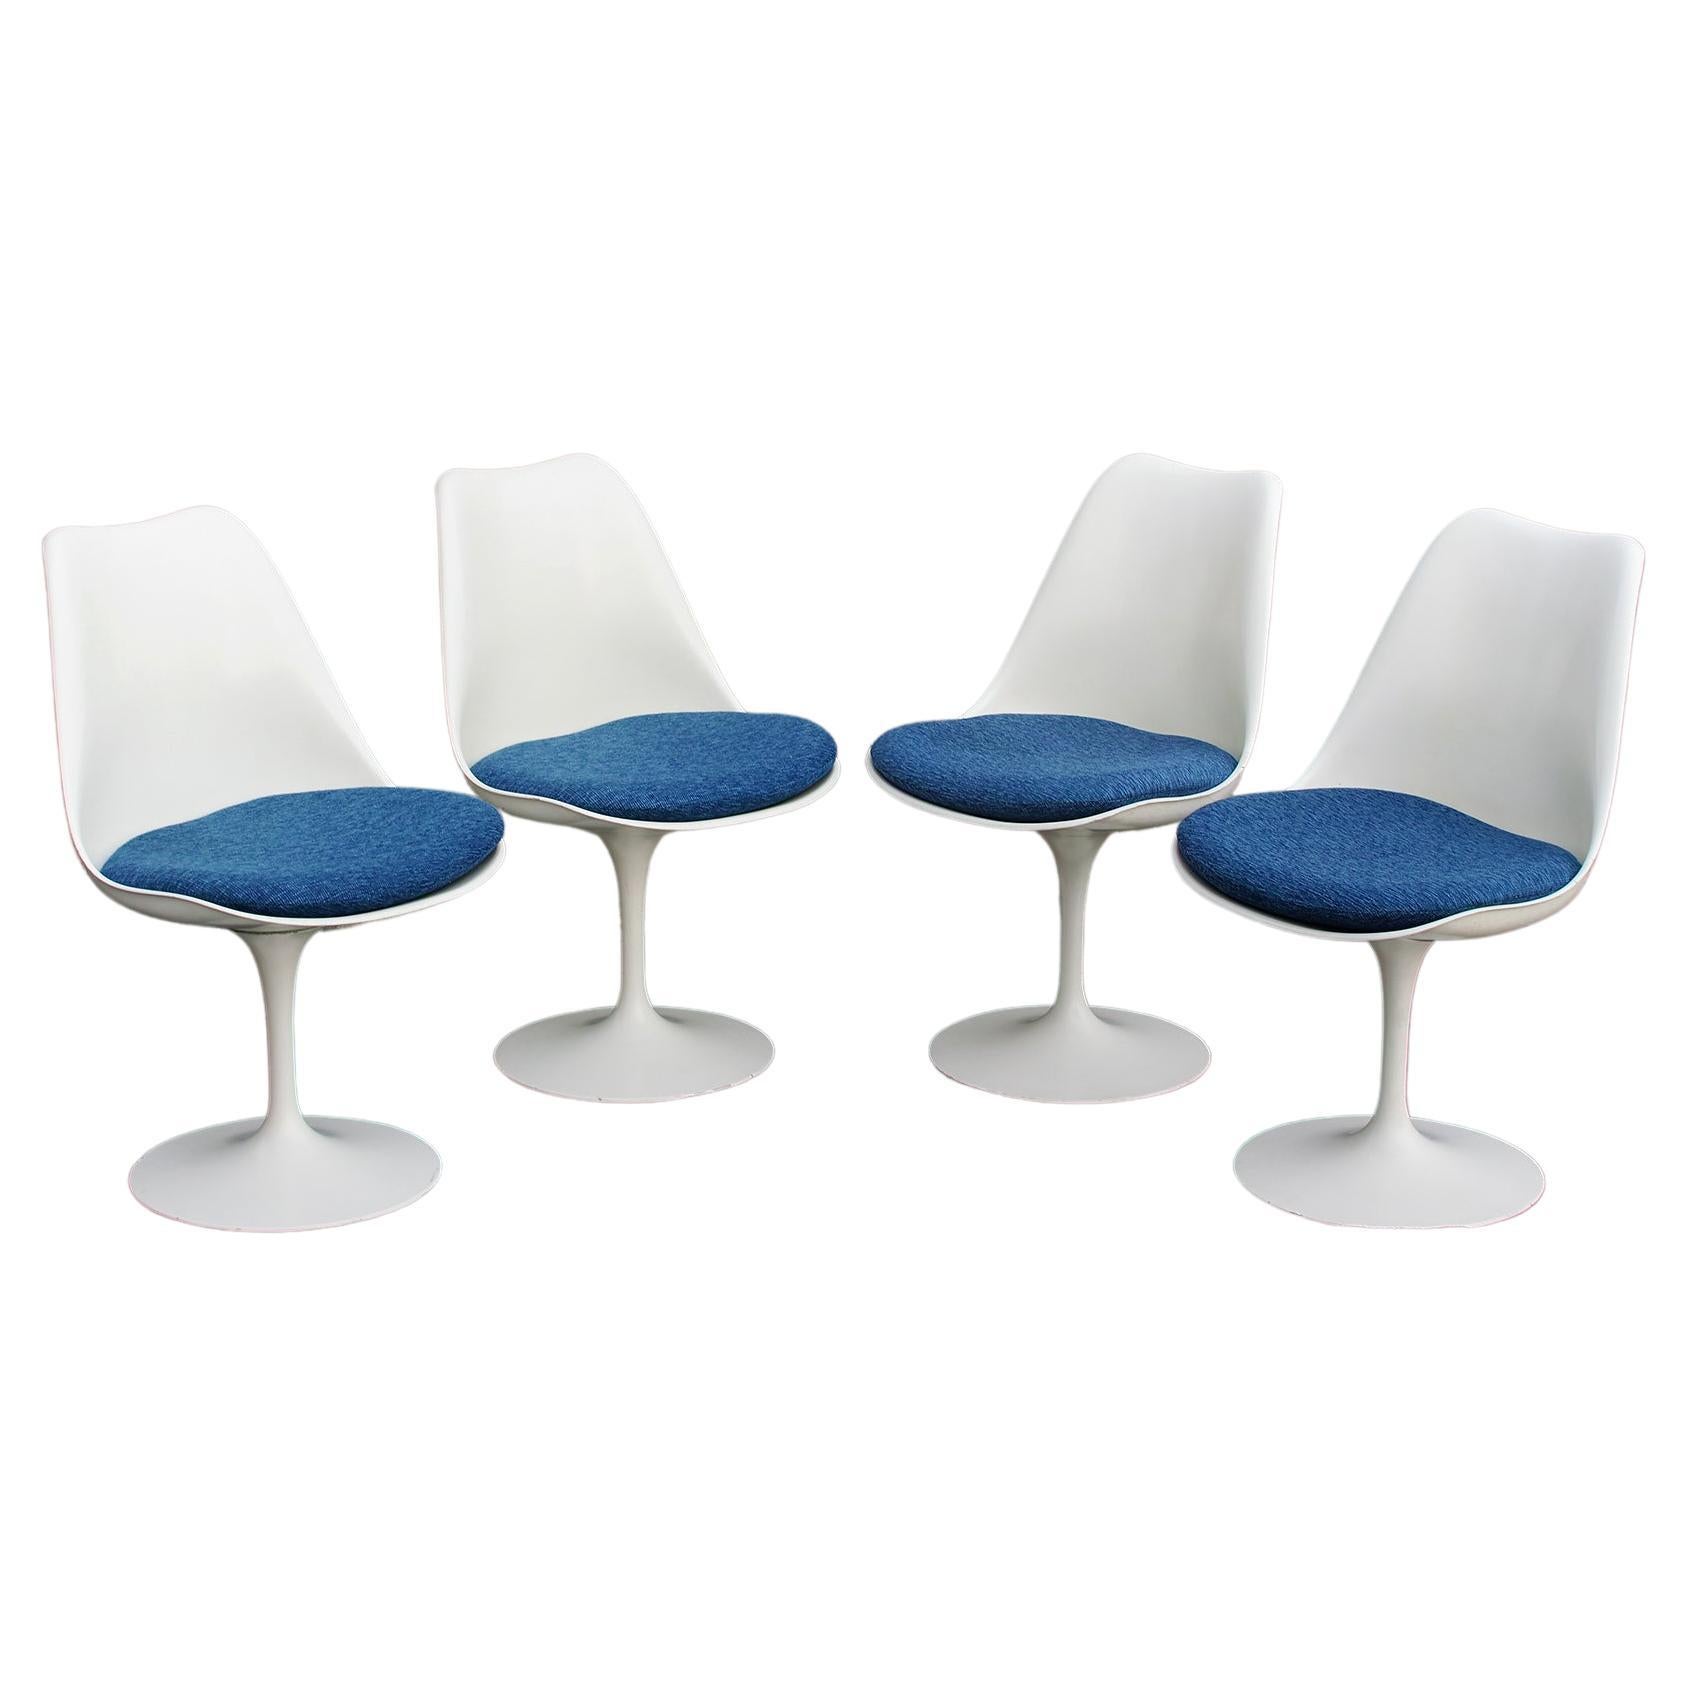 Early Production Saarinen Tulip Dining Chairs For Sale